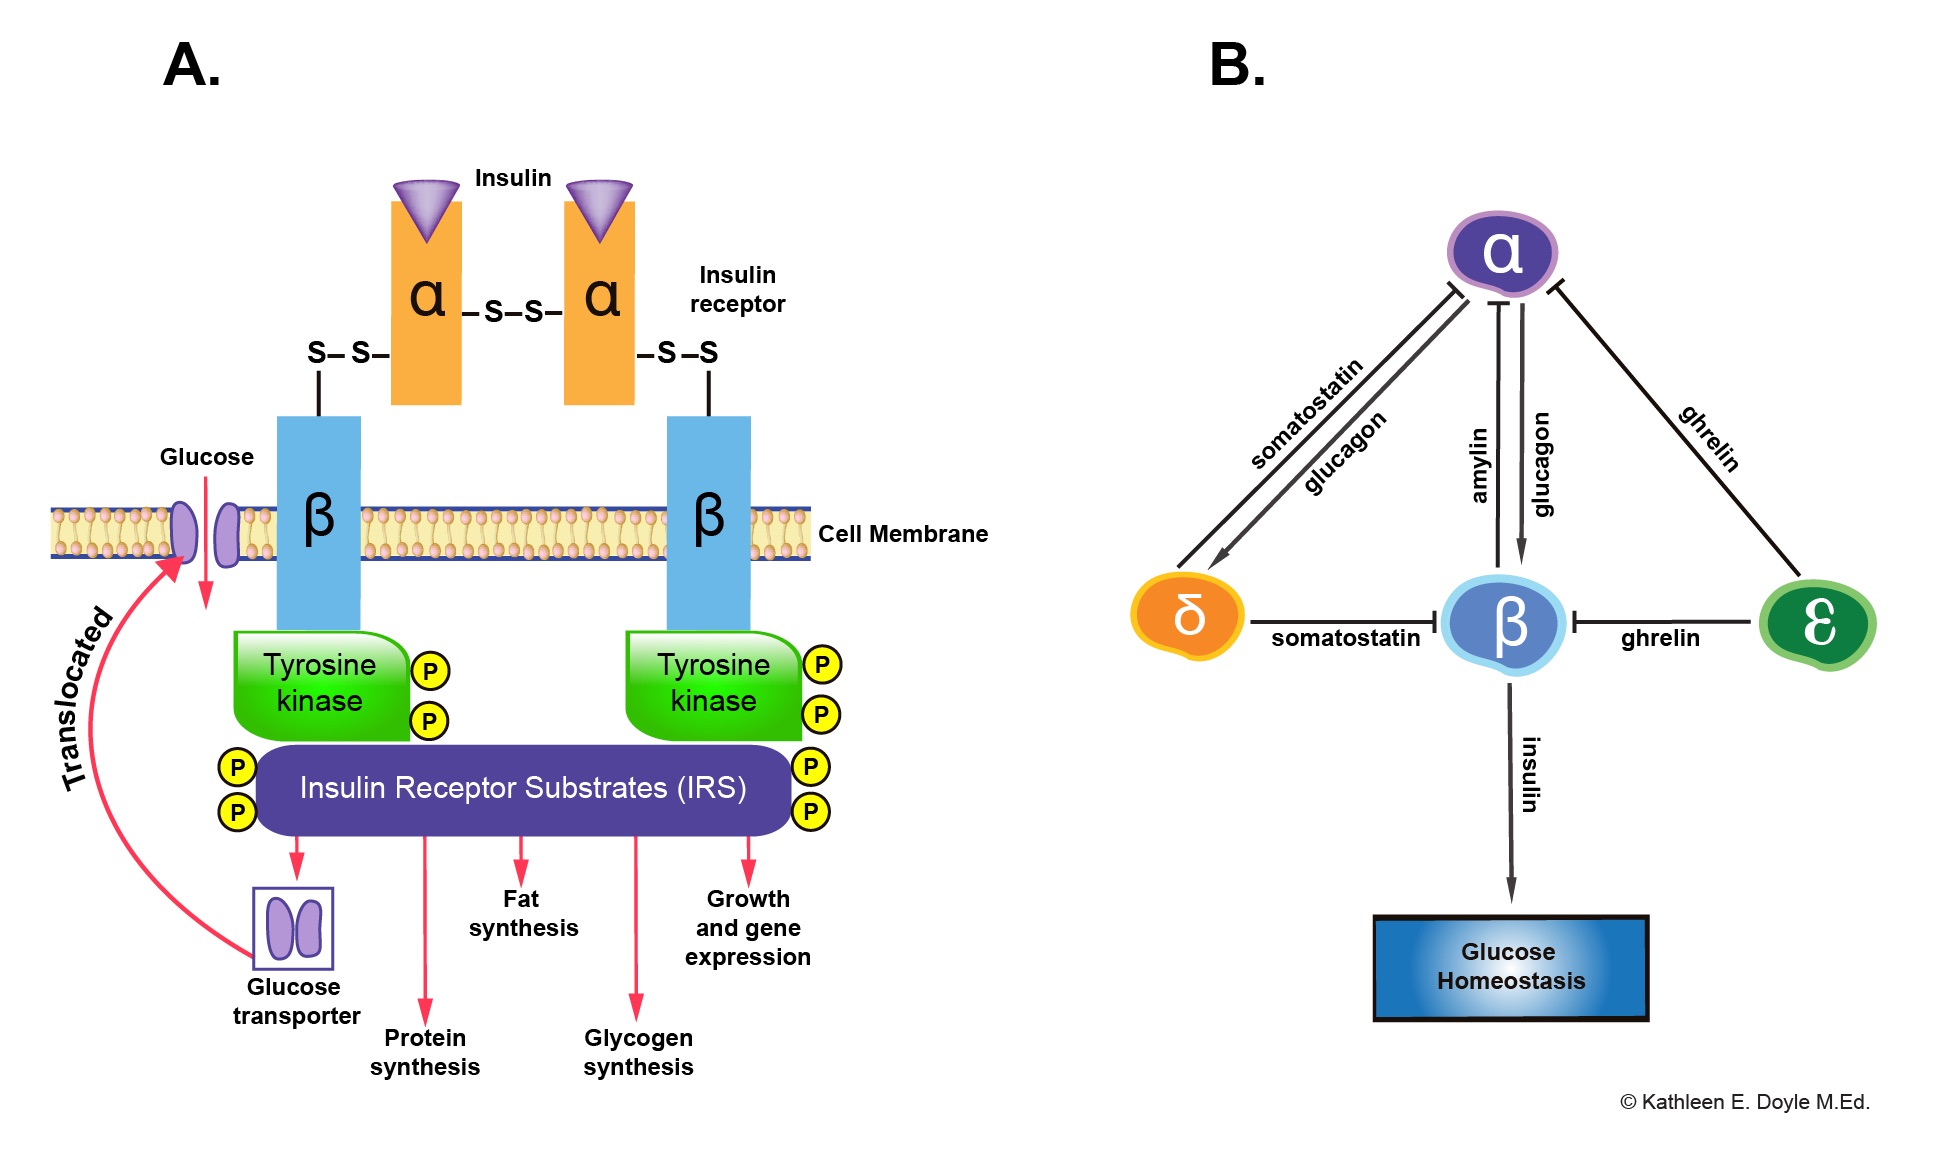 A; Insulin receptor and subsequent functions, B; Paracrine interaction between different types of pancreatic islet cells
